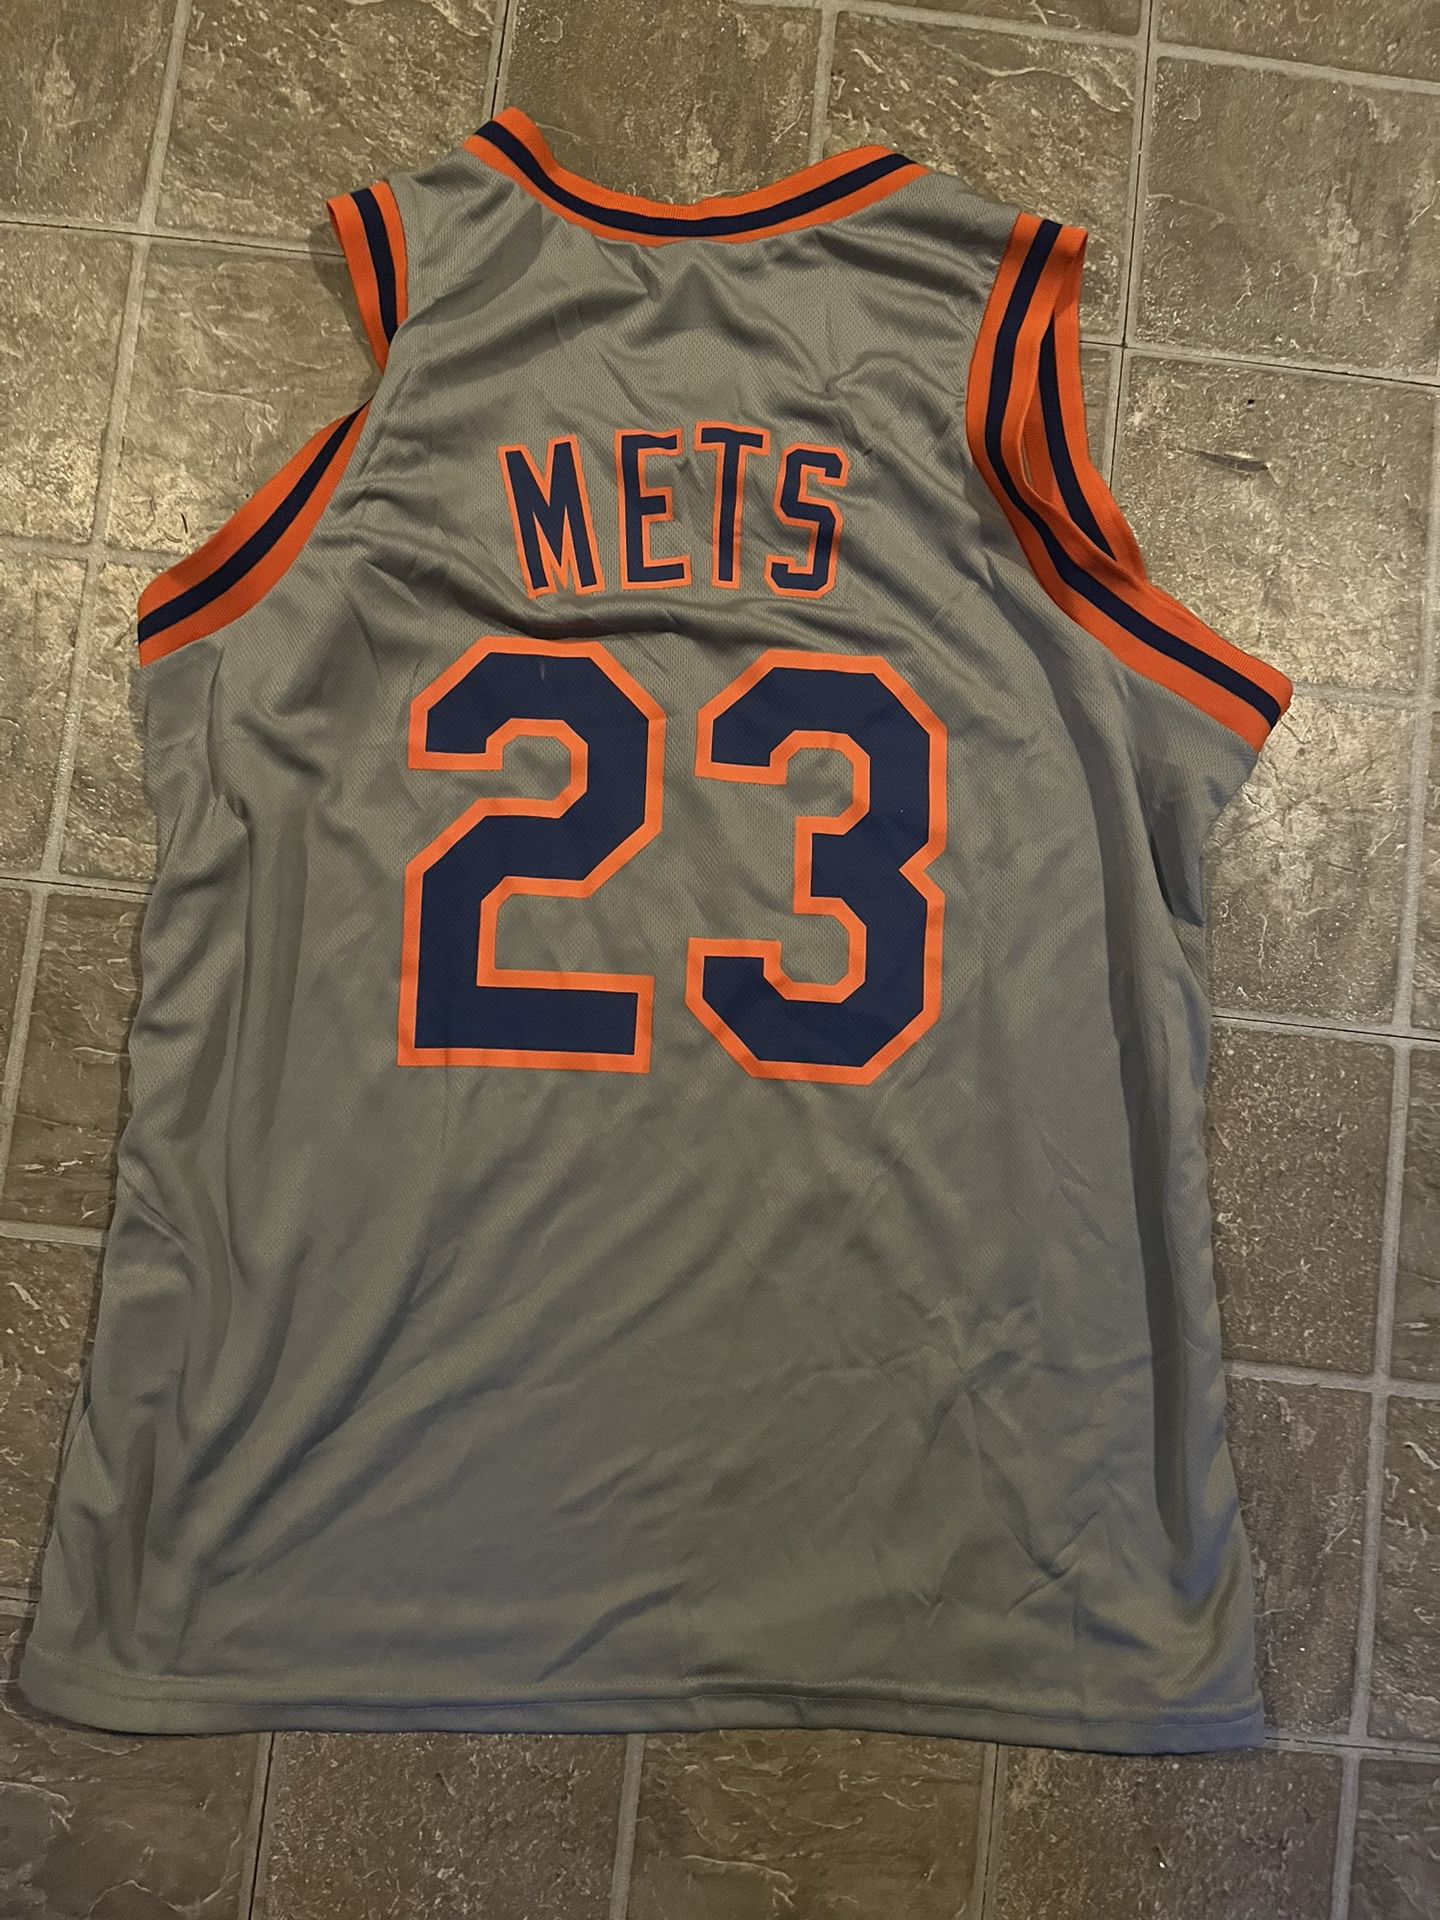 New York Mets Basketball Jersey for Sale in Lindenhurst, NY - OfferUp